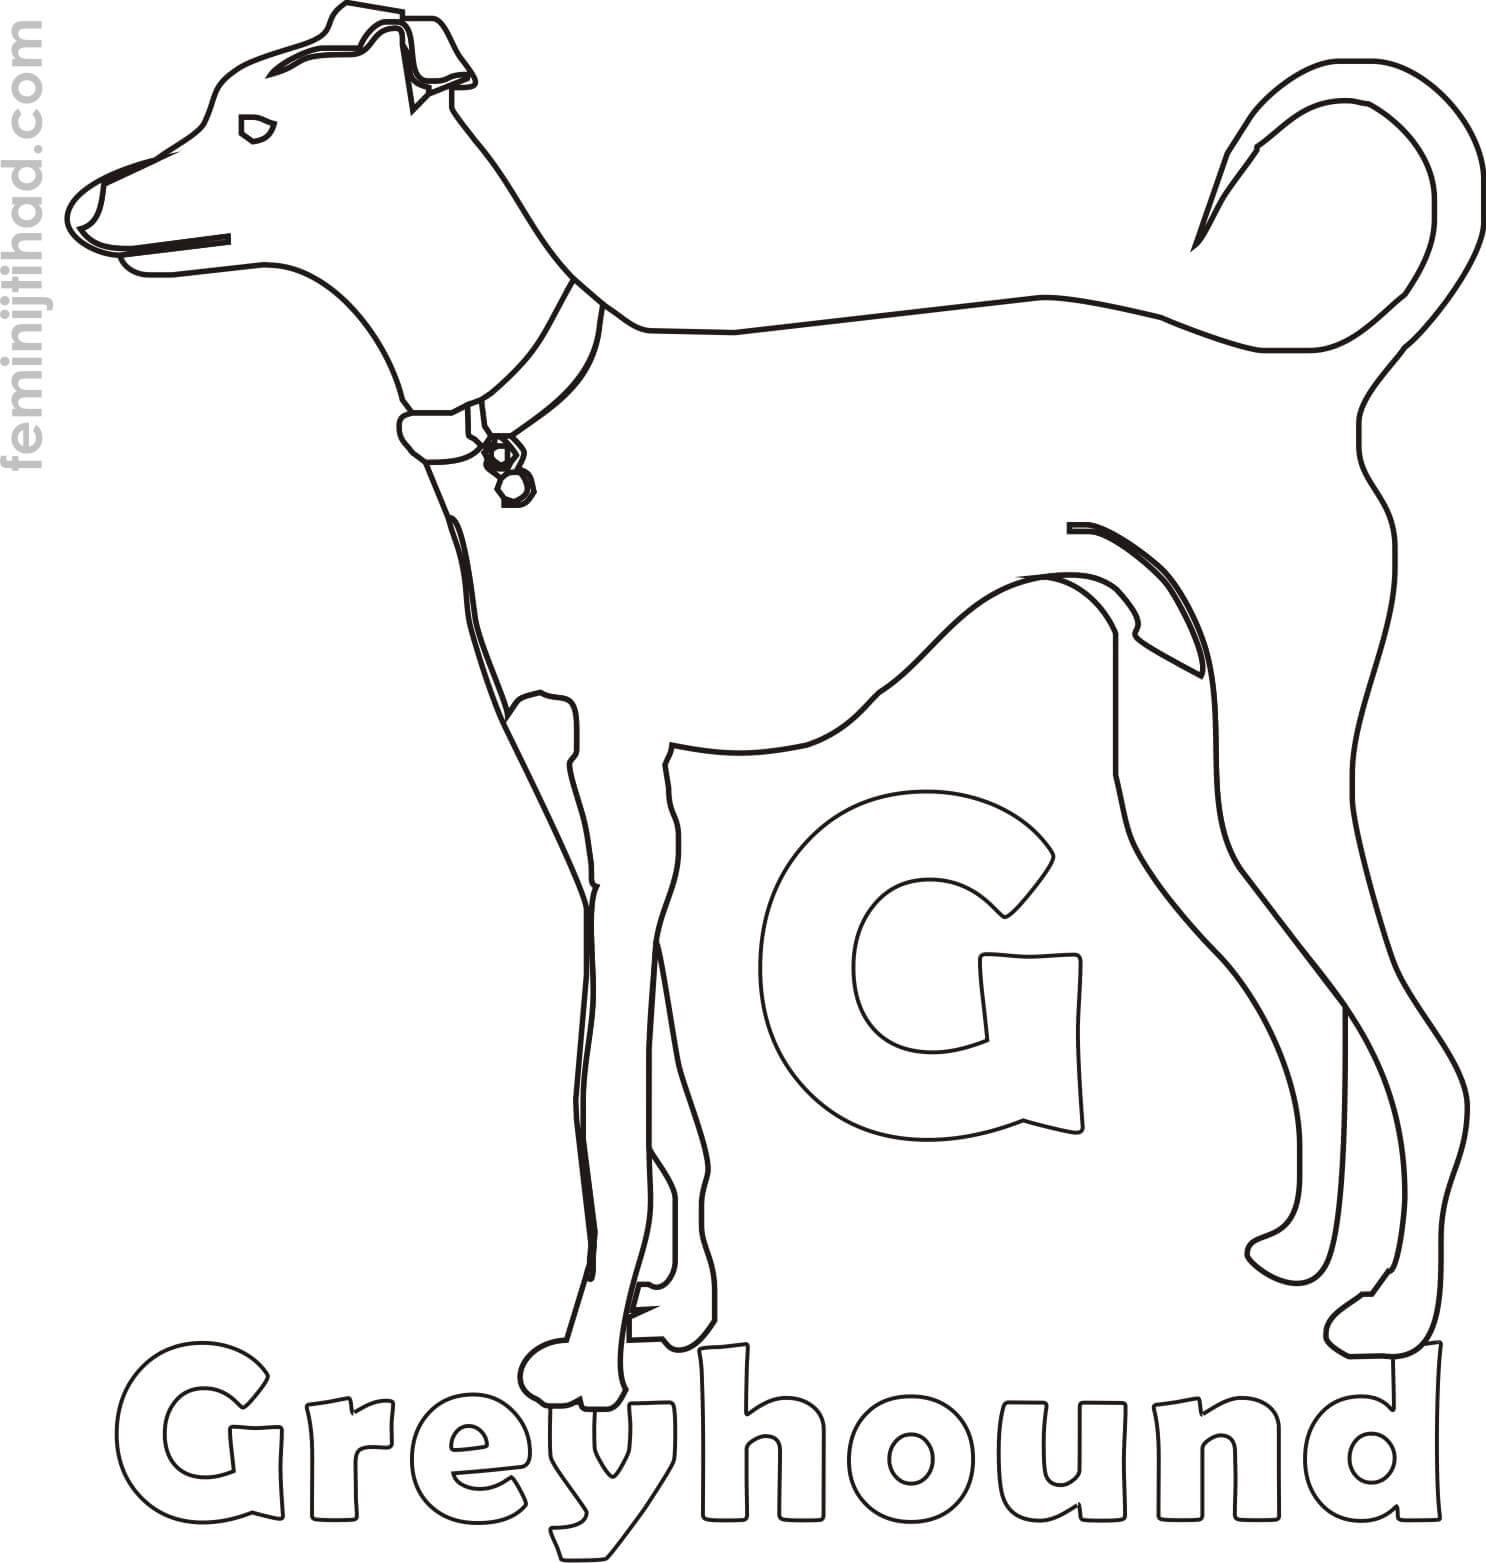 greyhound coloring page free to print